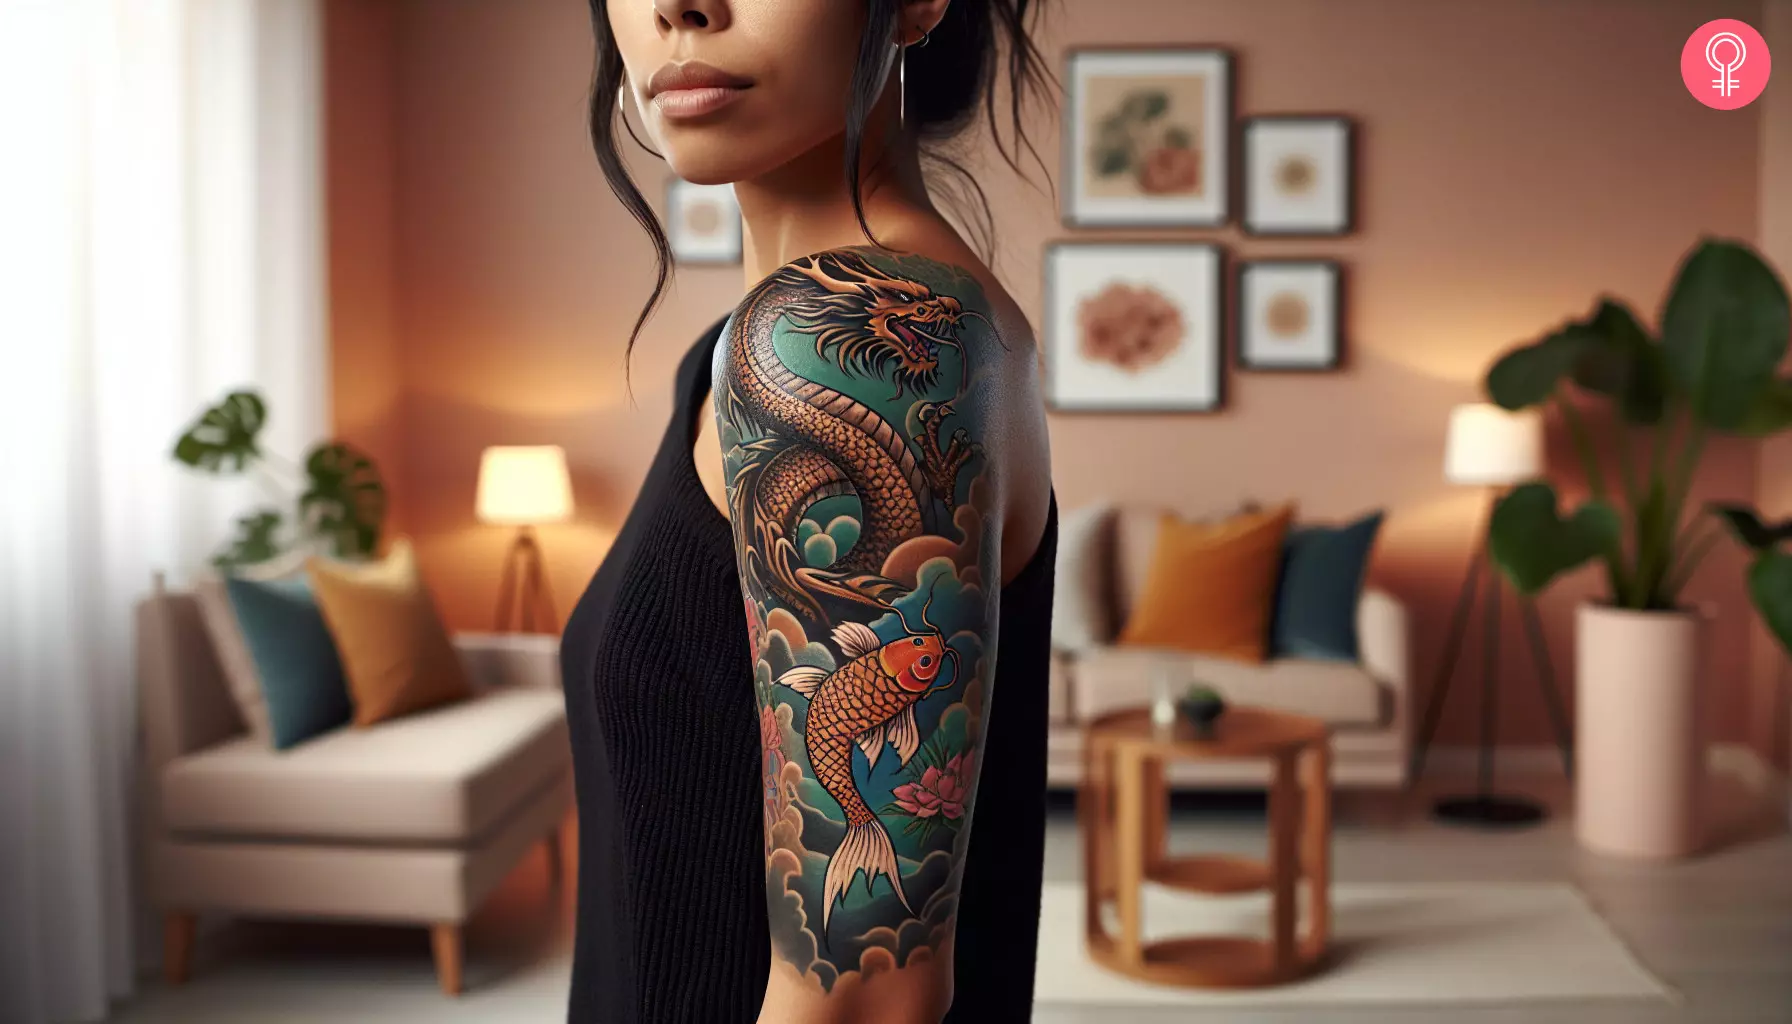 A colorful dragon and koi fish tattoo on the arm of a woman